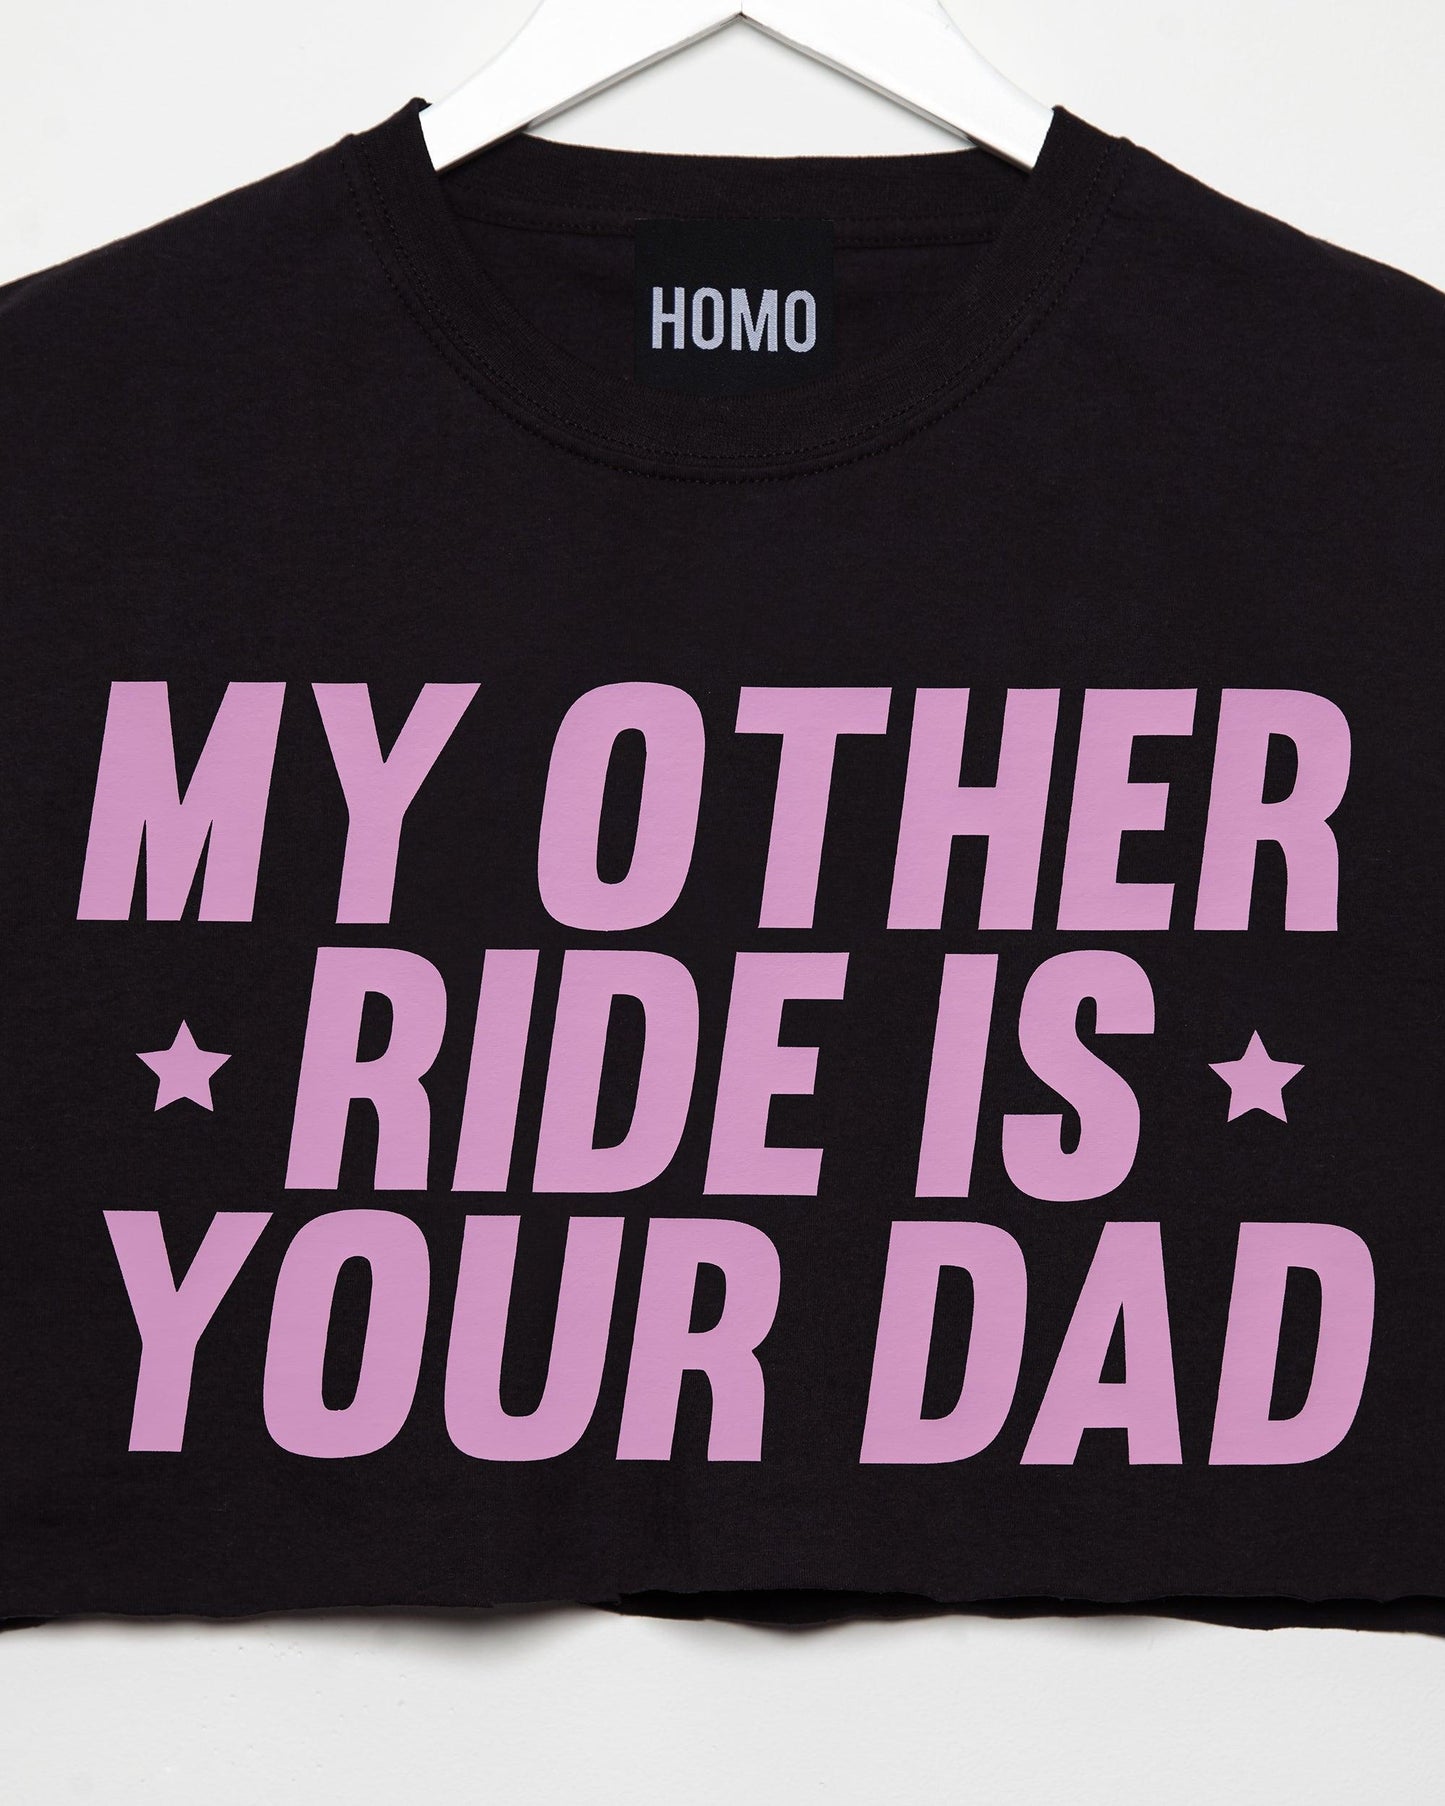 My other ride is your dad, pink on black - Sleeveless crop-top.